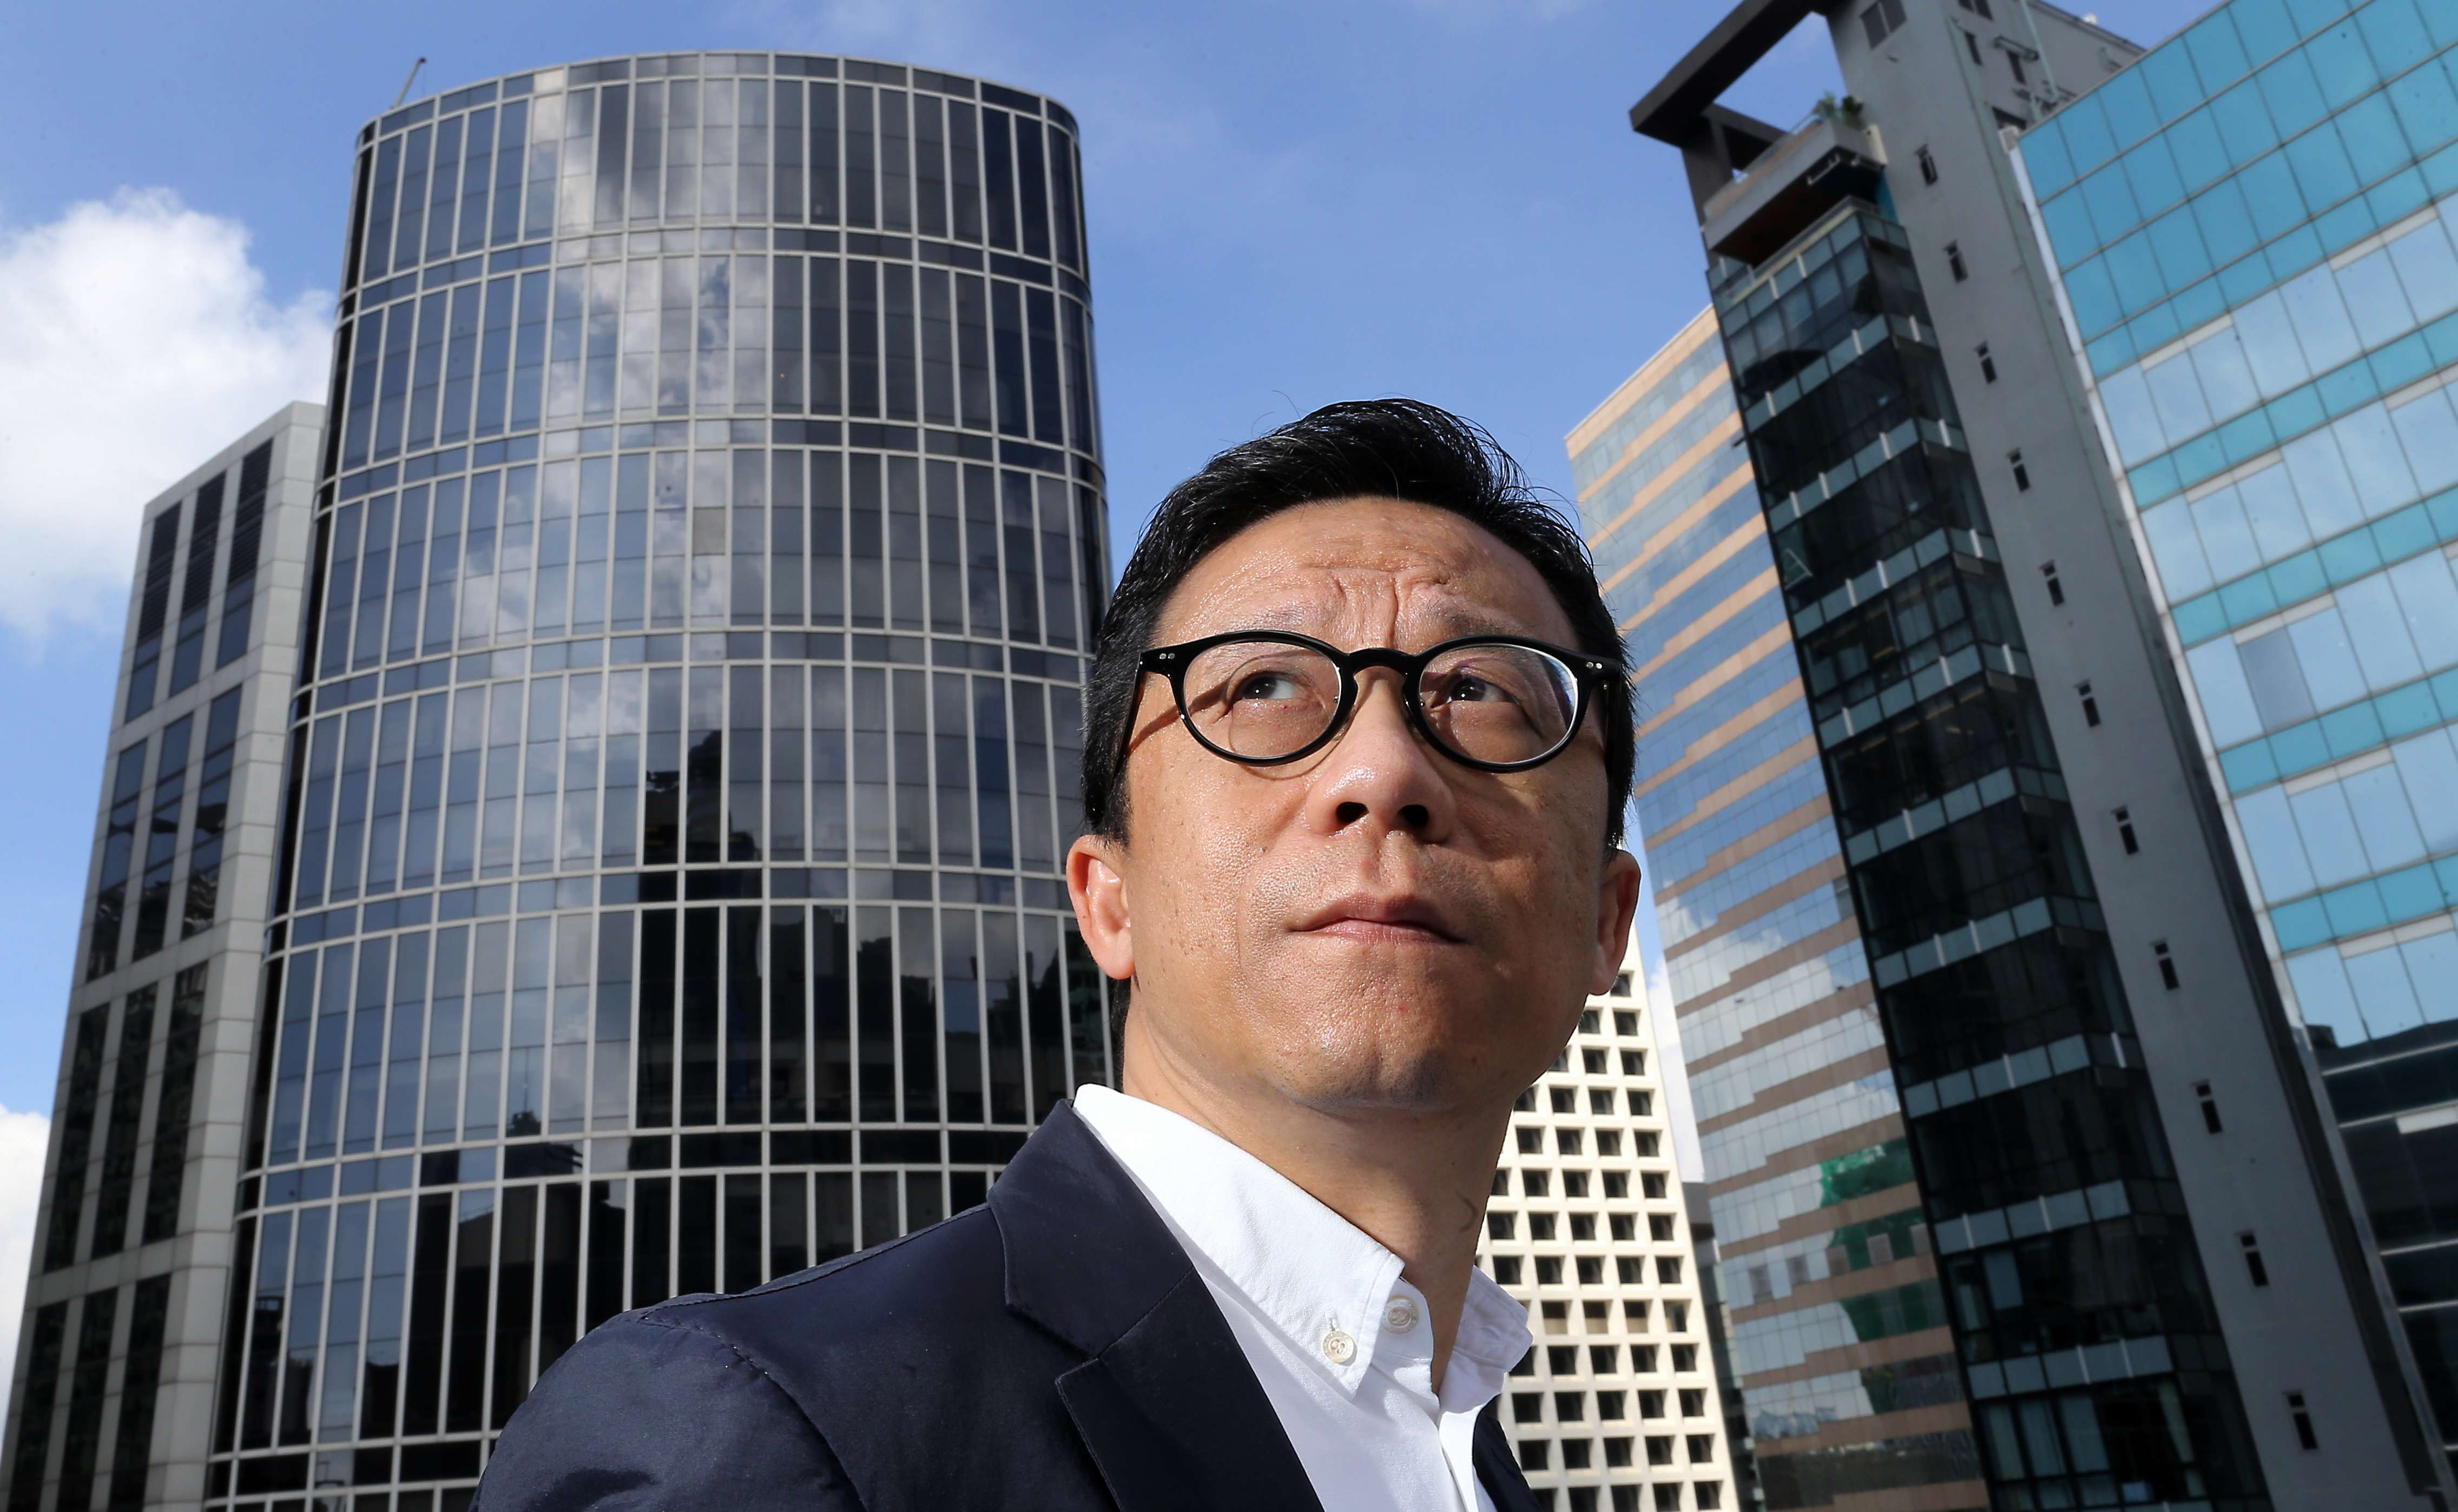 HKTV chairman Ricky Wong says renovation work on his multimedia centre in Tseung Kwan O will be finished by the end of the year. Photo: Dickson Lee